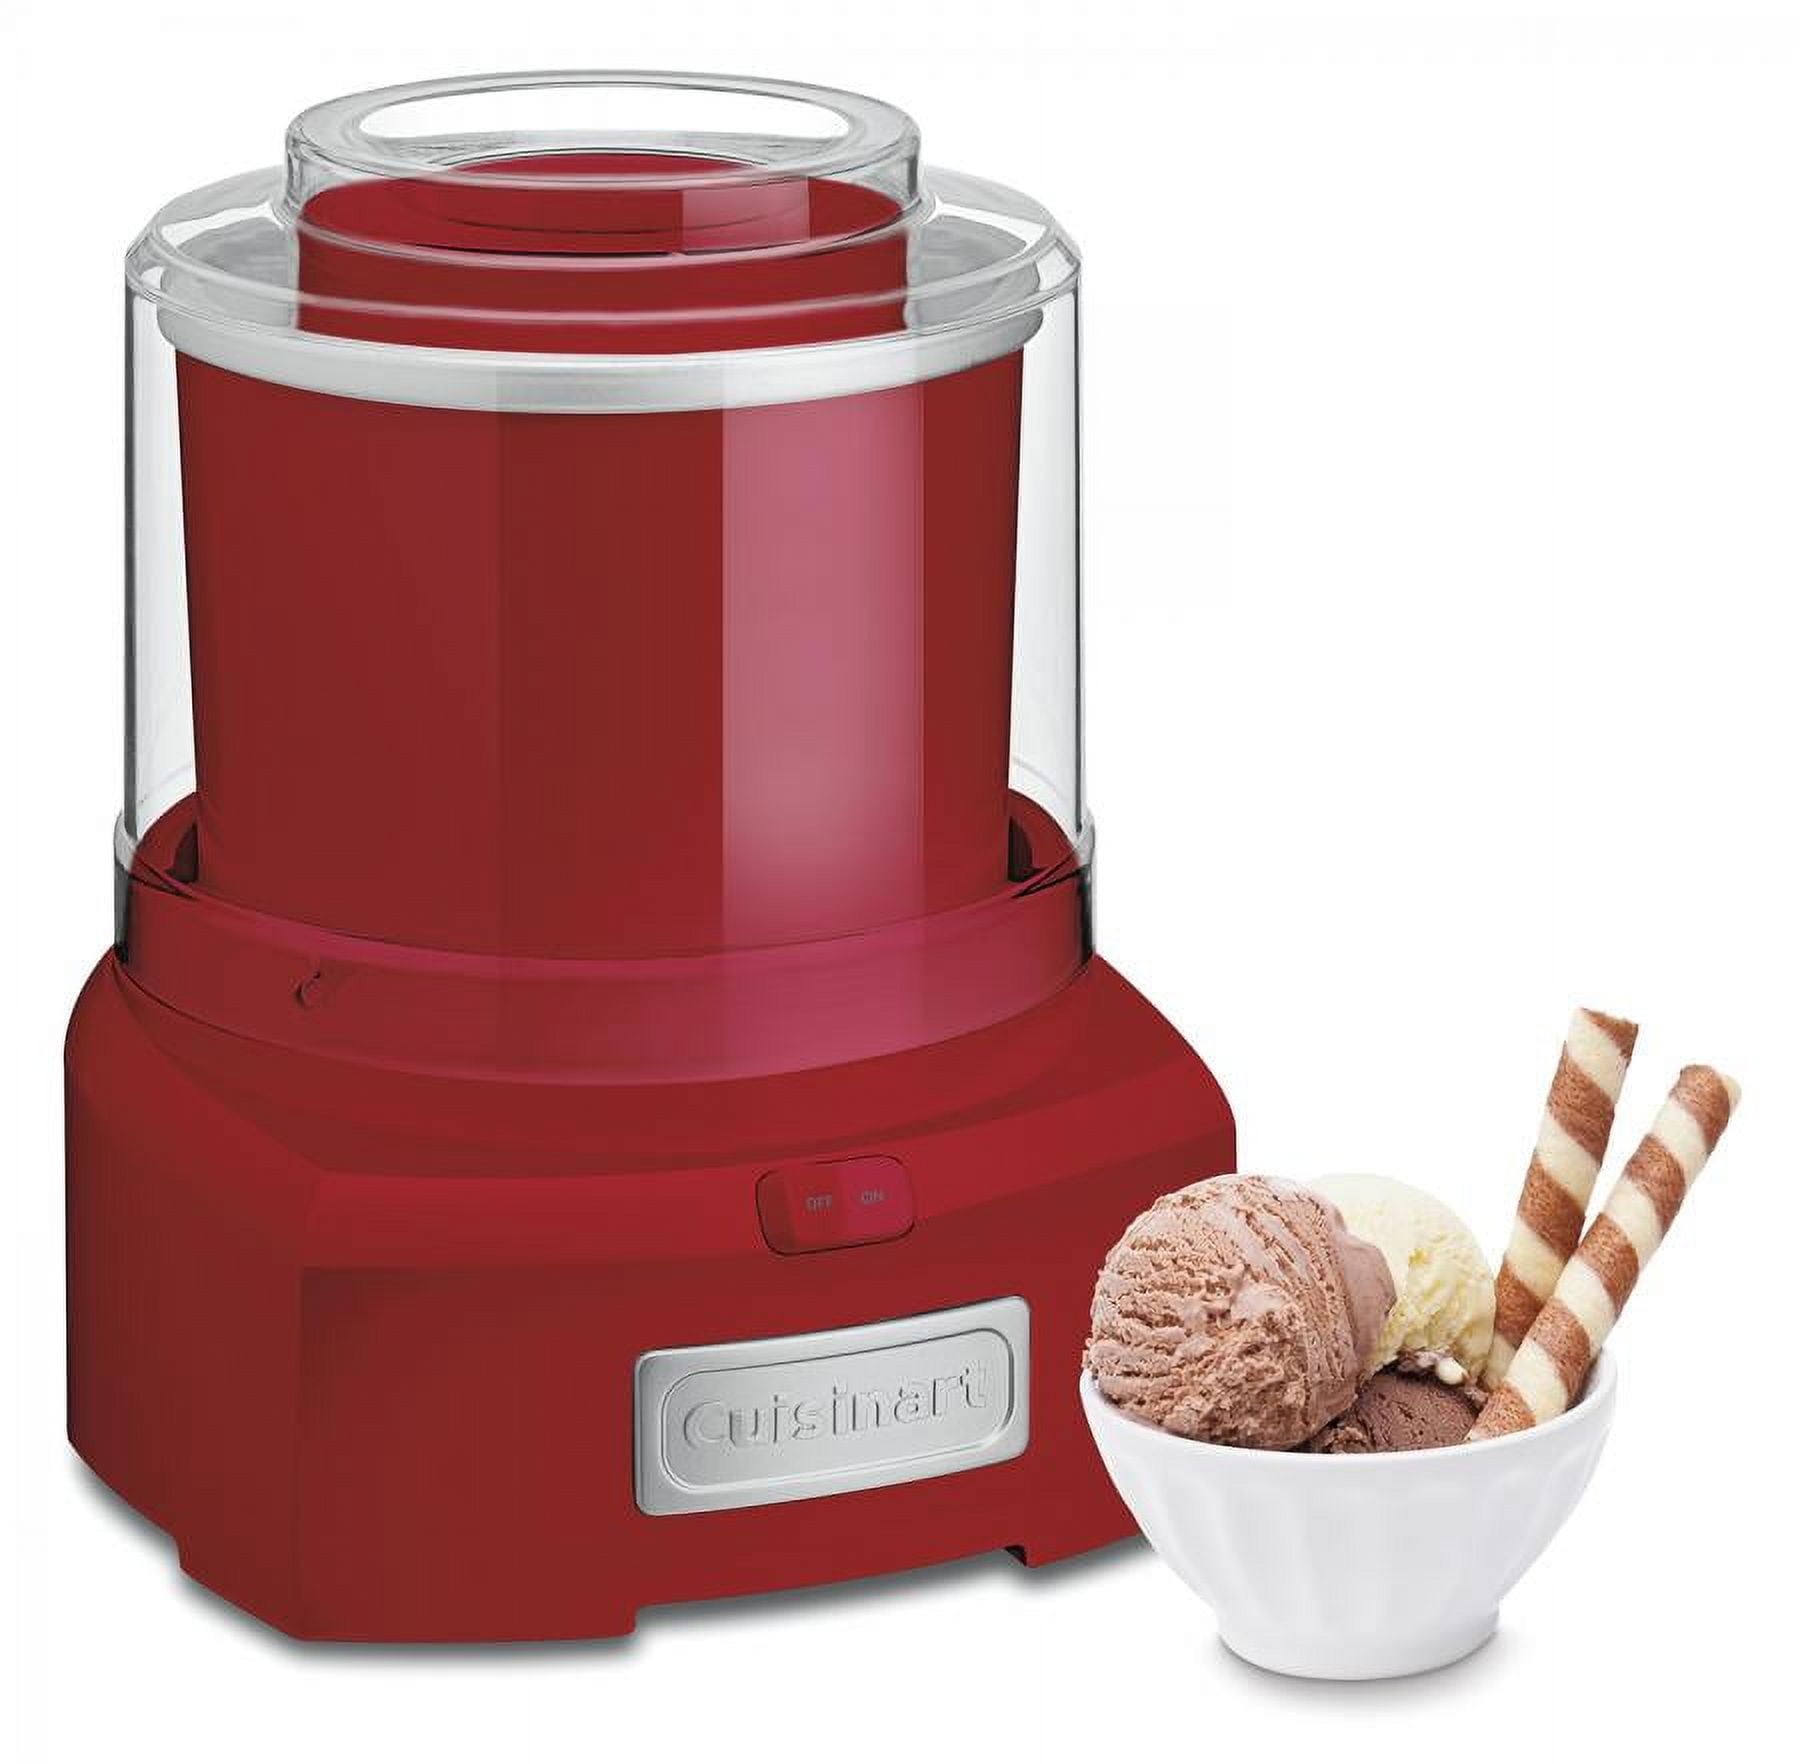 The Cuisinart Ice Cream Maker Is 58% Off on